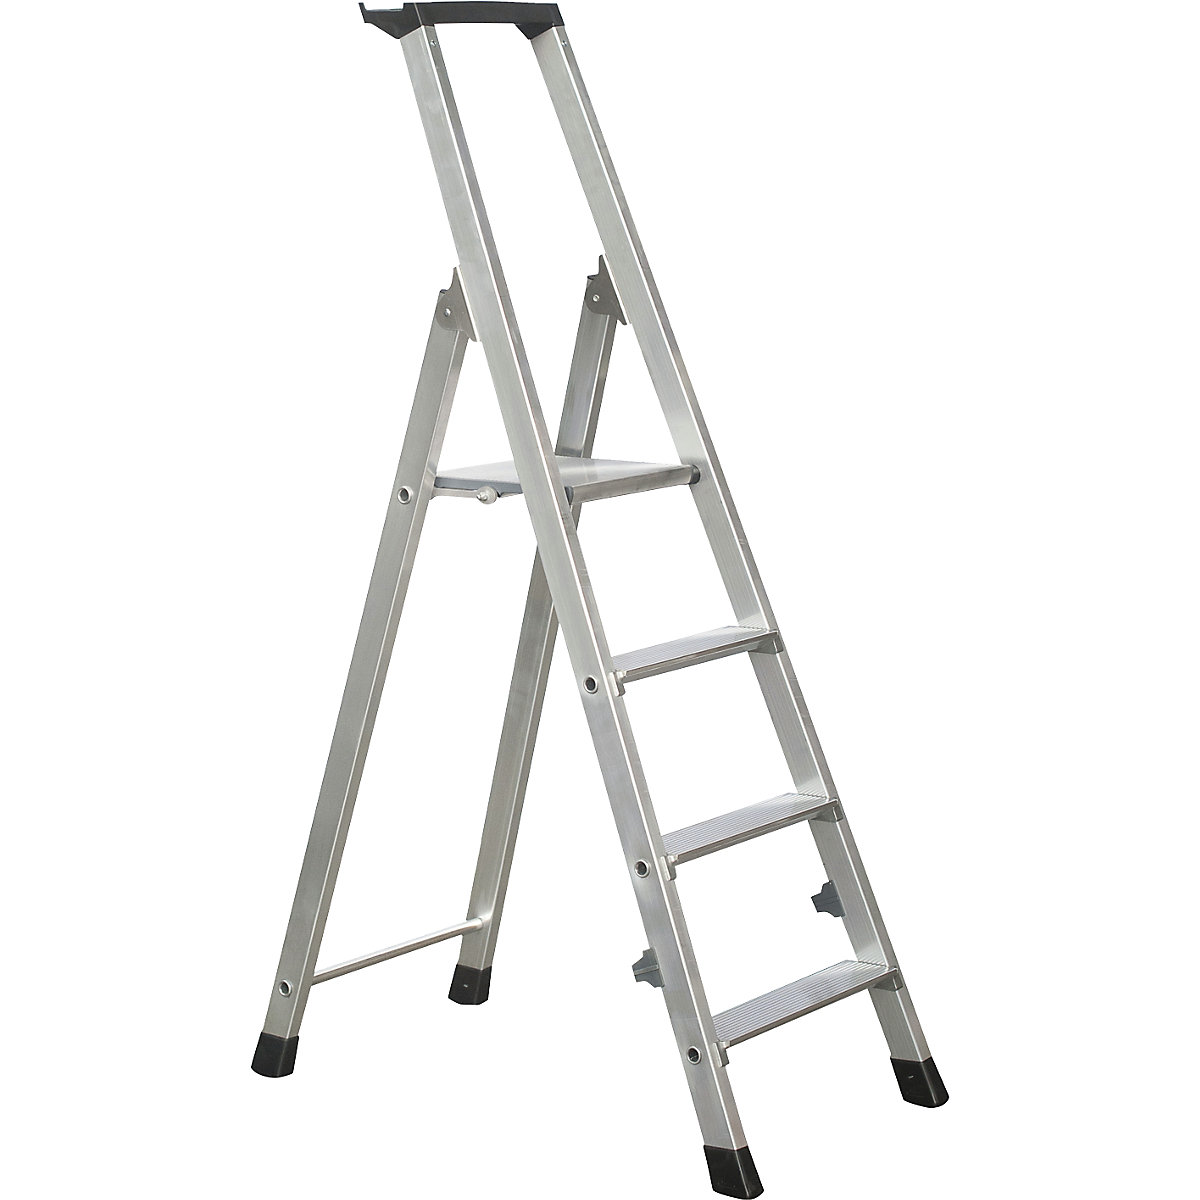 Folding step ladder, single sided access – ZARGES